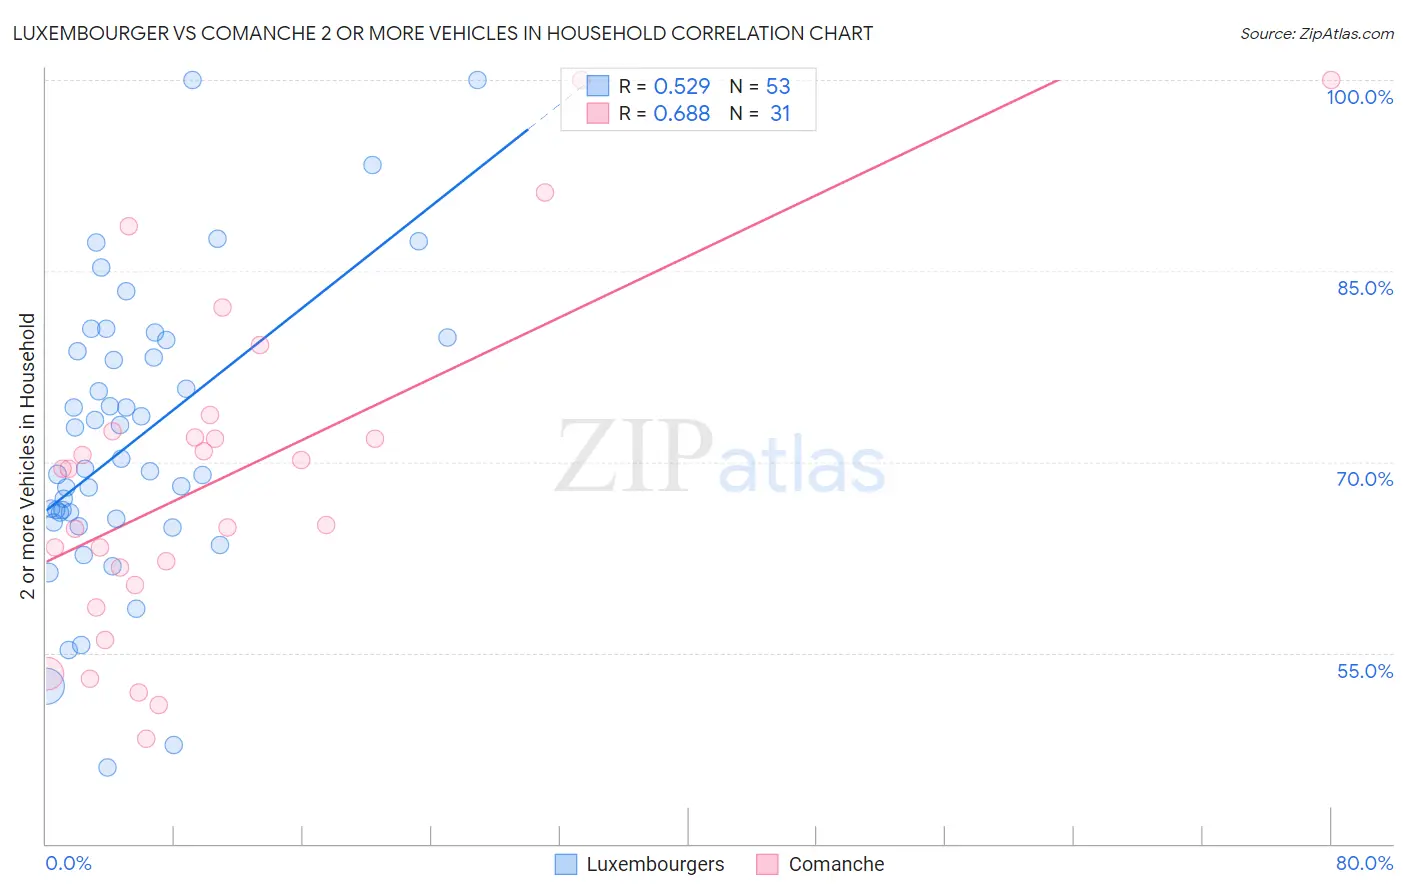 Luxembourger vs Comanche 2 or more Vehicles in Household